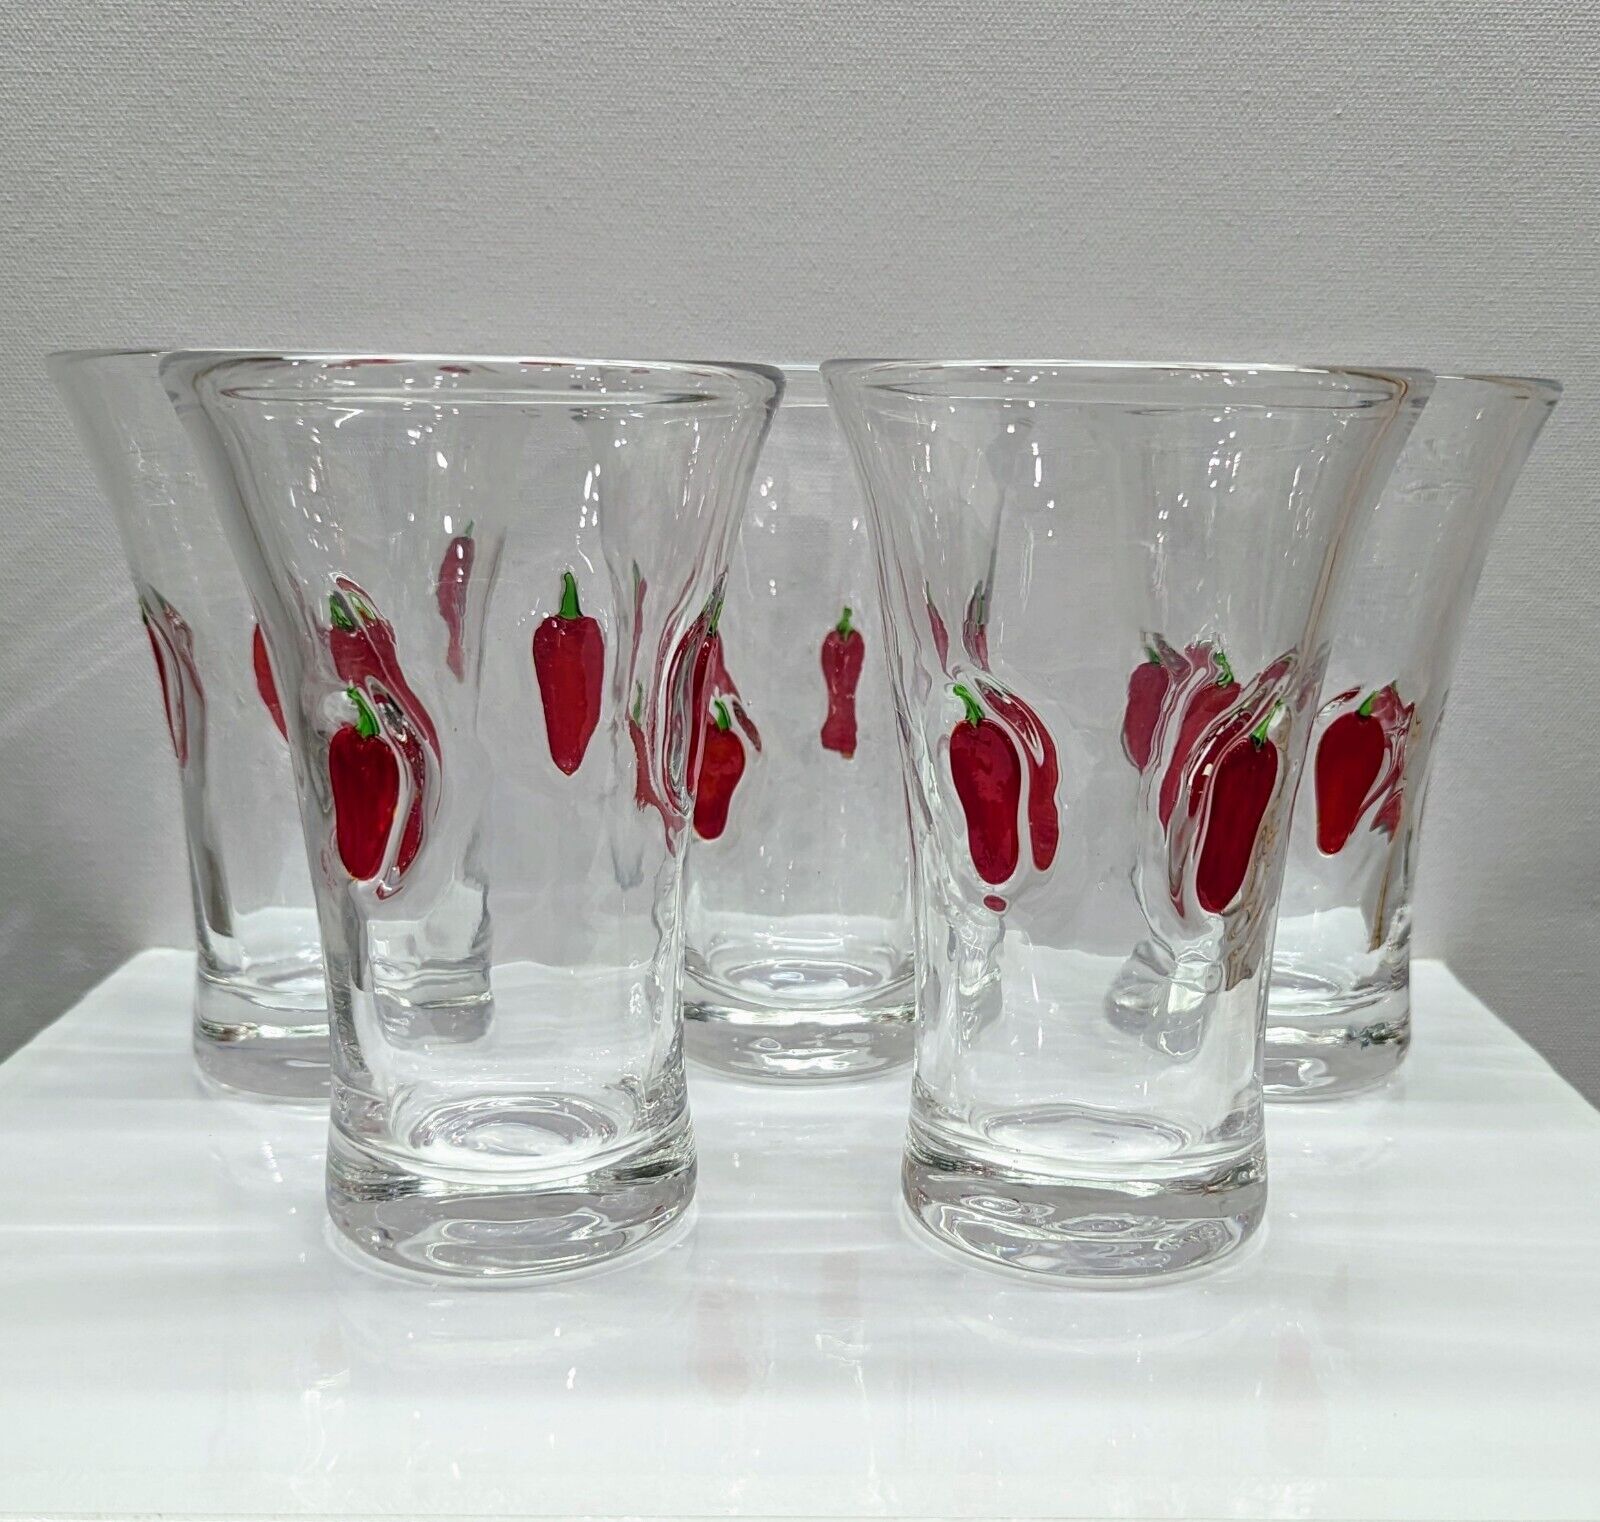 Hot Hot Hot Lovely Set of 5 Vintage Water Glasses with Red Glass Chili Peppers 